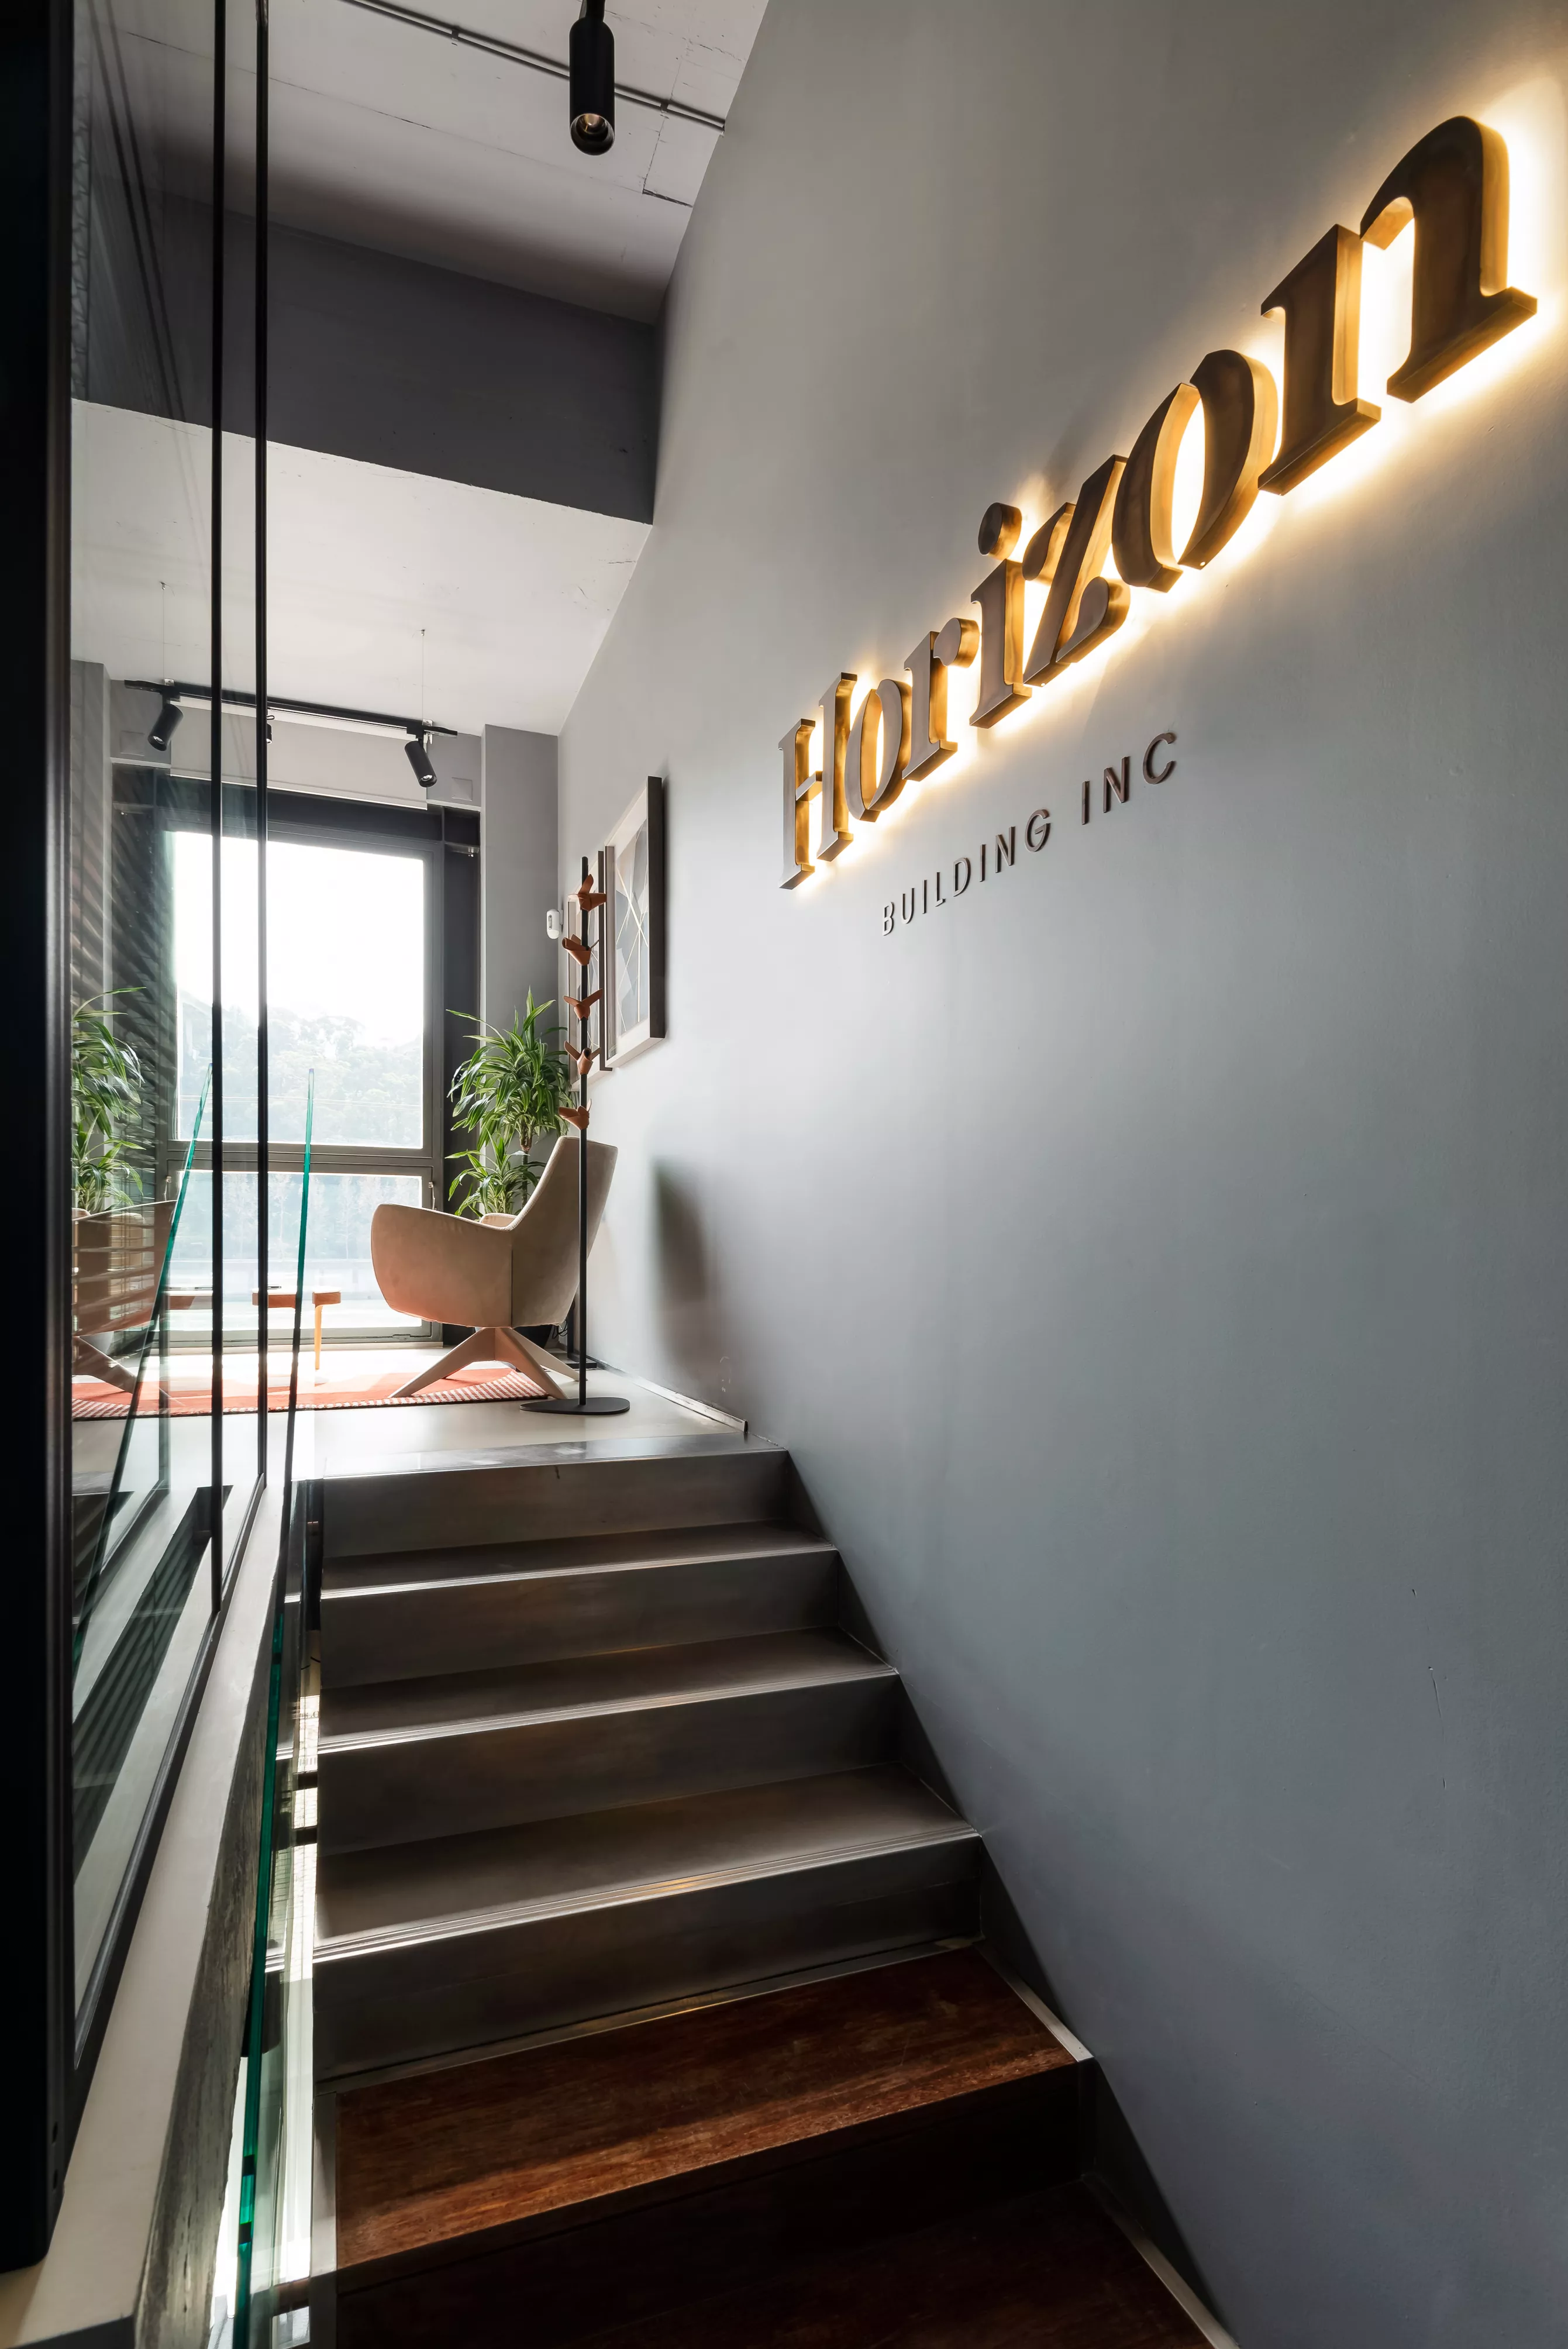 The ethereal aesthetics of HIMACS Pavia in a chic, industrial office design